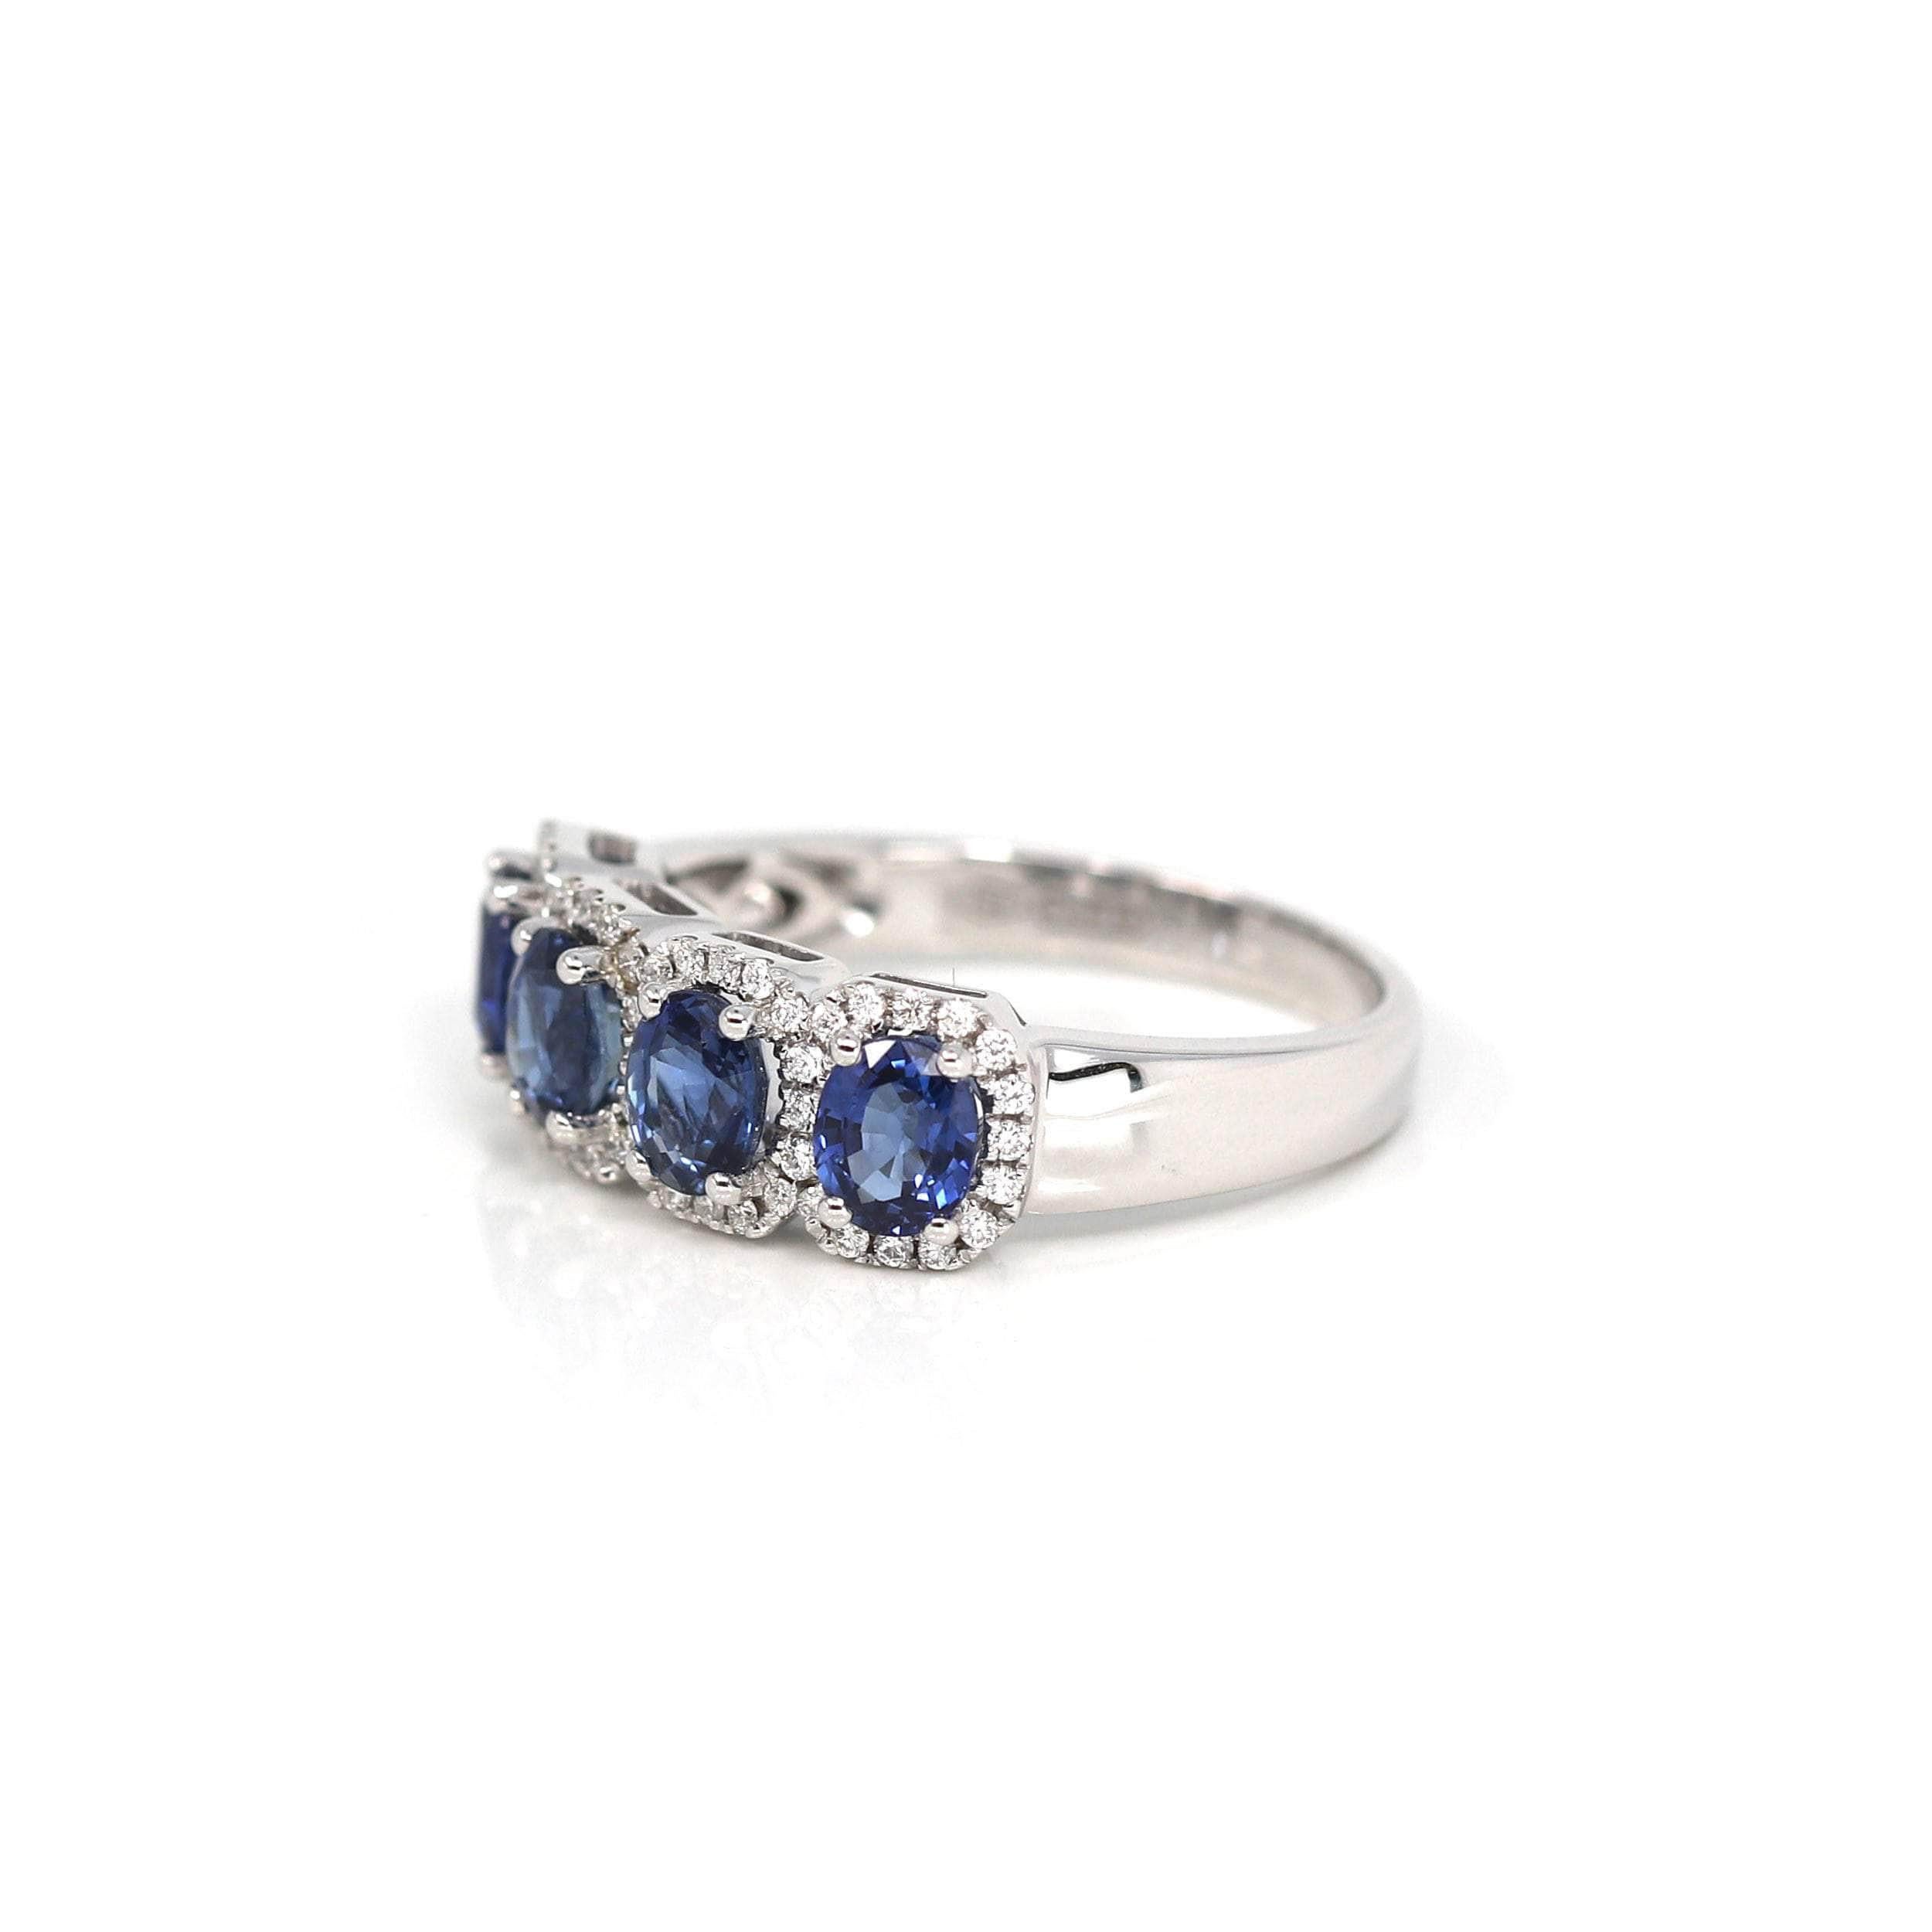 * Design Concept--- This ring features four stones set genuine Sir Lanka Sapphire with diamonds. The design is simplistic yet elegant. The ring looks very exquisite with some diamonds tracing the accents. Baikalla artisans are dedicated to combining